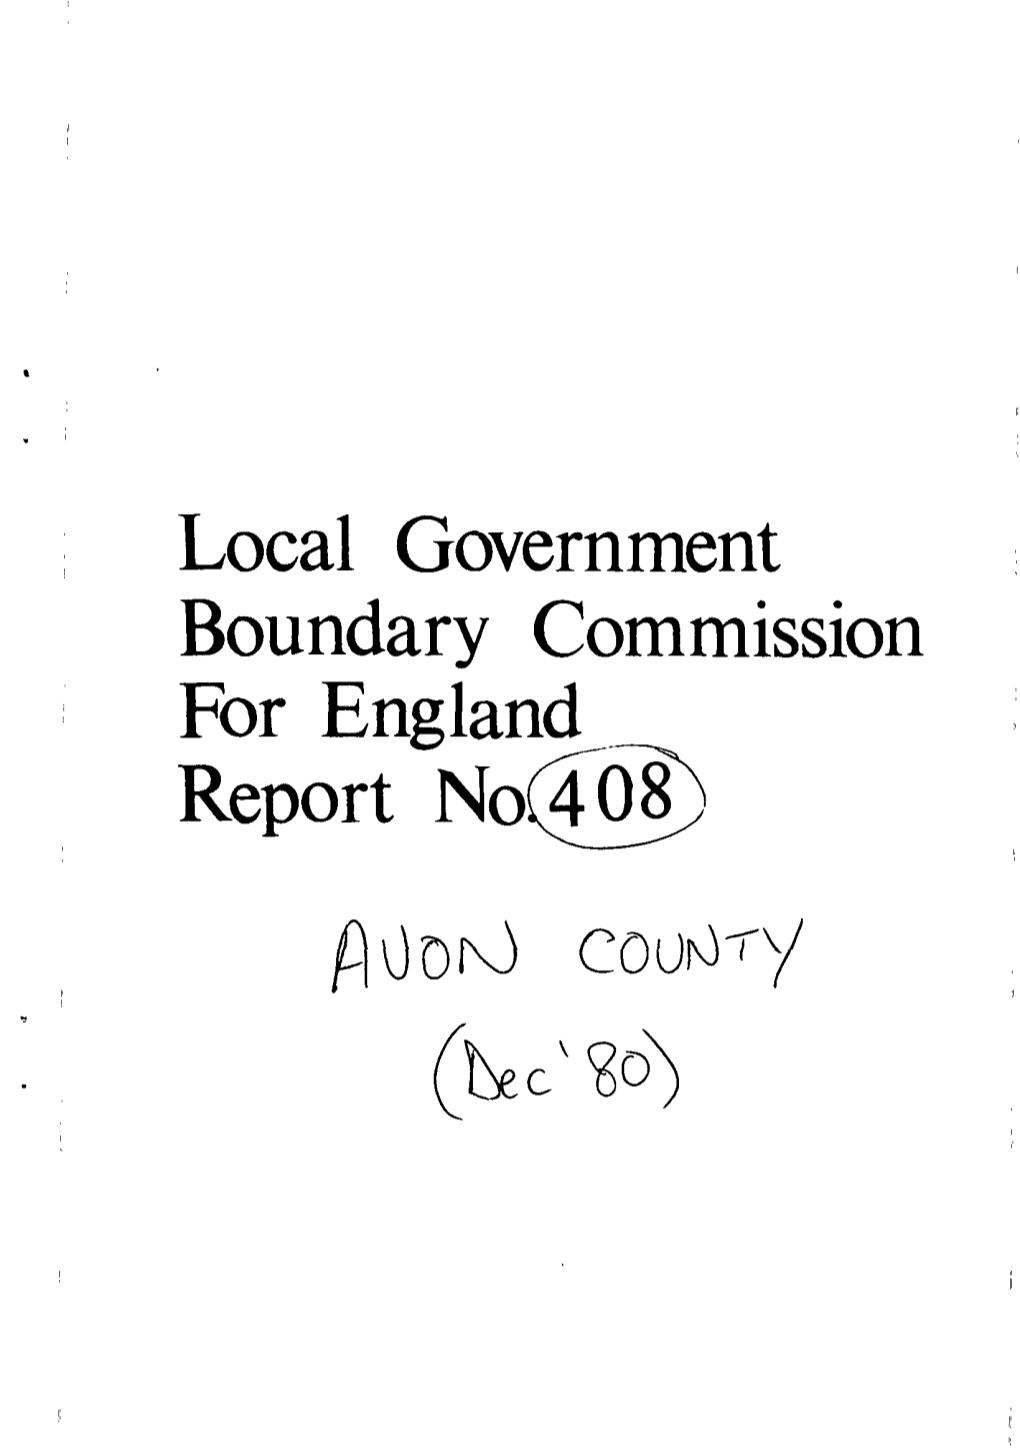 Local Government Boundary Commission for England Report No(408